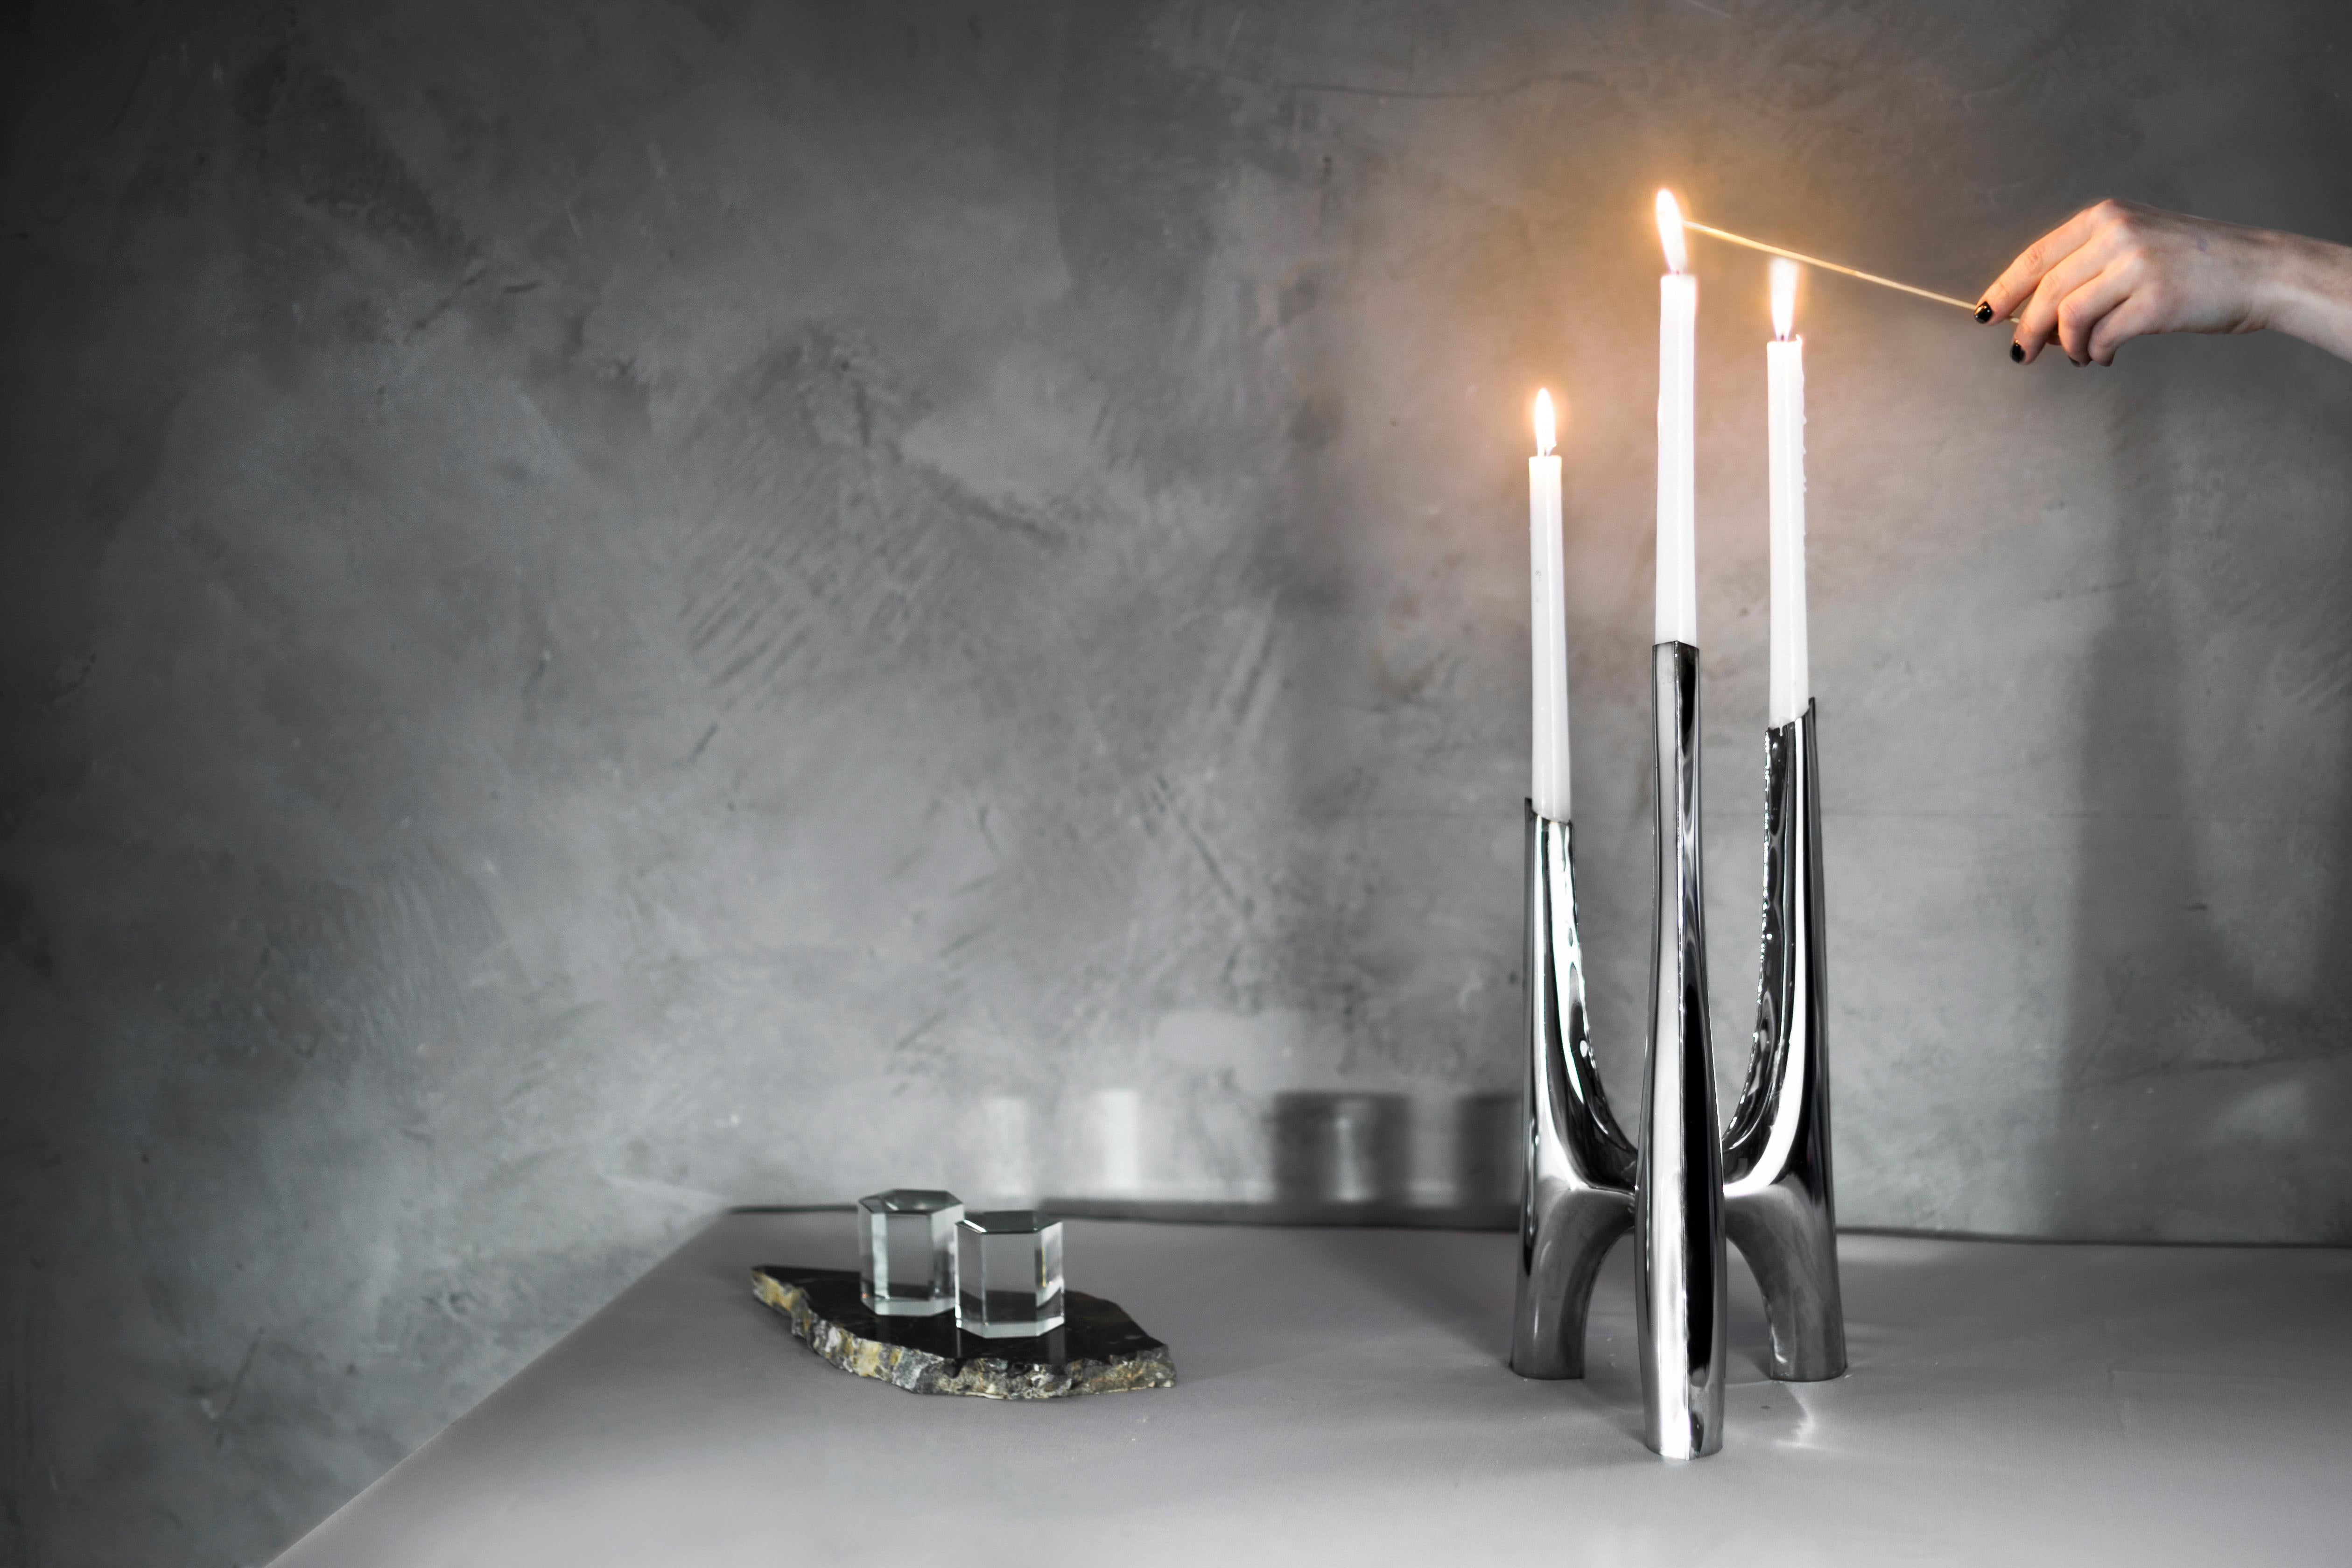 Usually made of metal, the modern candle holders are available in myriad shapes and styles. From simple, minimalist ones to opulent, eclectic candelabra. Triglav, a steel candle holder from Zieta Studio, is a candelabrum with three arms of unusual